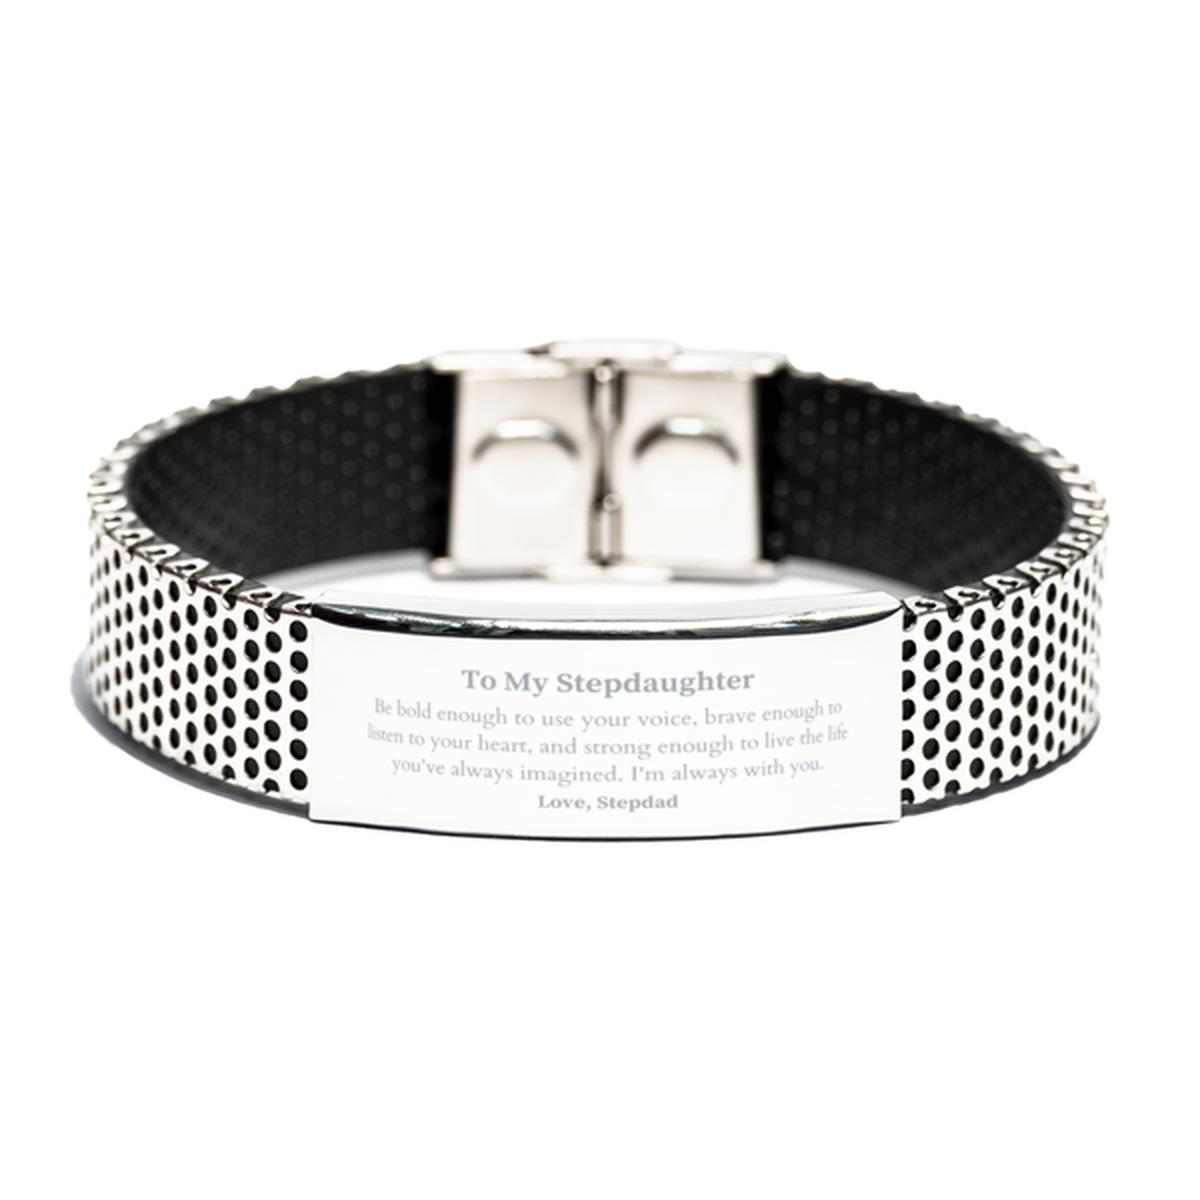 Keepsake Stepdaughter Stainless Steel Bracelet Gift Idea Graduation Christmas Birthday Stepdaughter from Stepdad, Stepdaughter Be bold enough to use your voice, brave enough to listen to your heart. Love, Stepdad